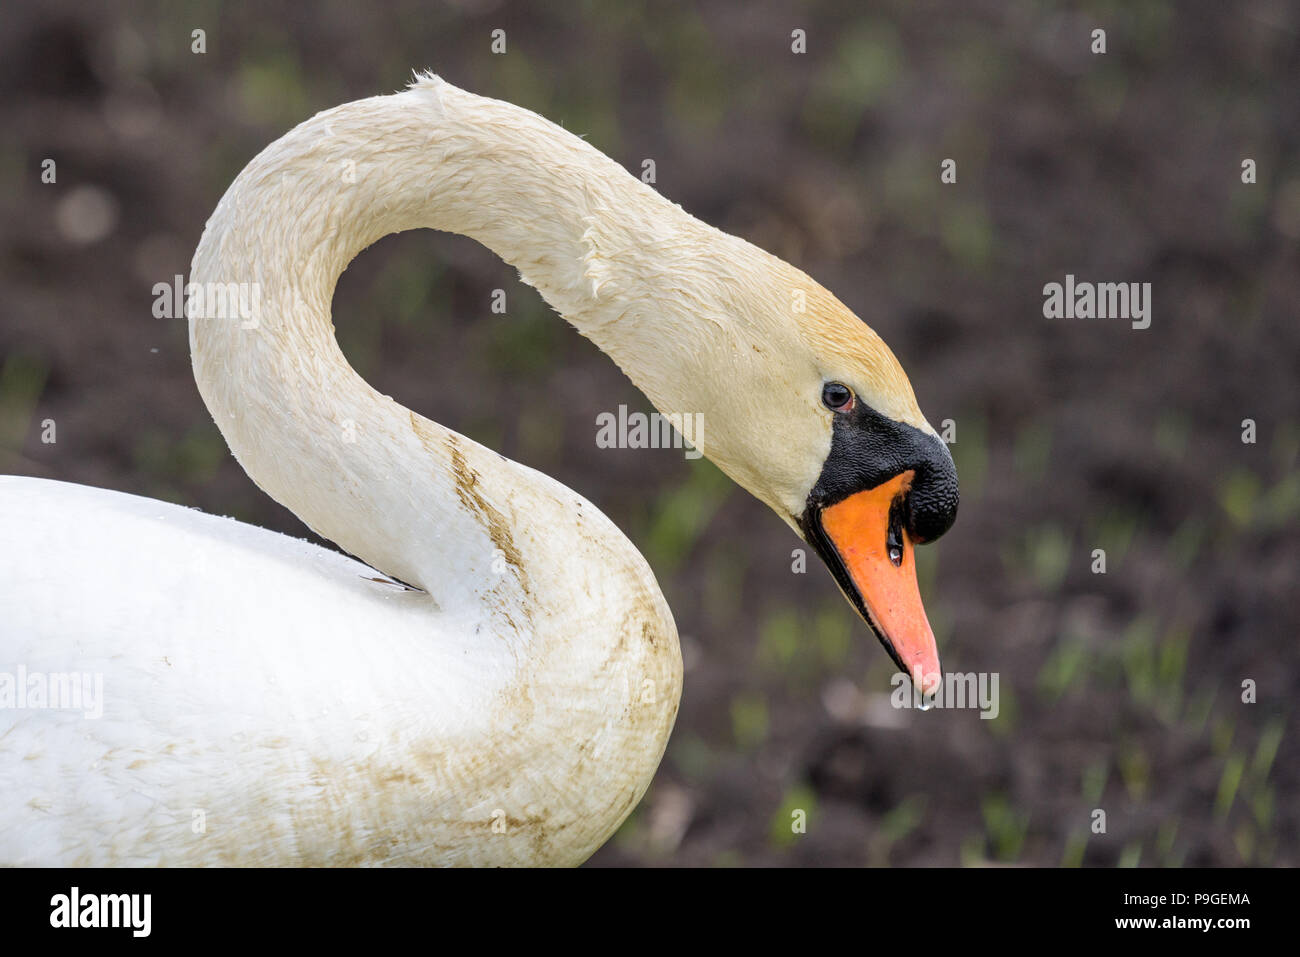 Portrait of a mute swan (sygnus olor).The swan has  just left the water and waterdrops are still visible on the feathers and beak. Stock Photo